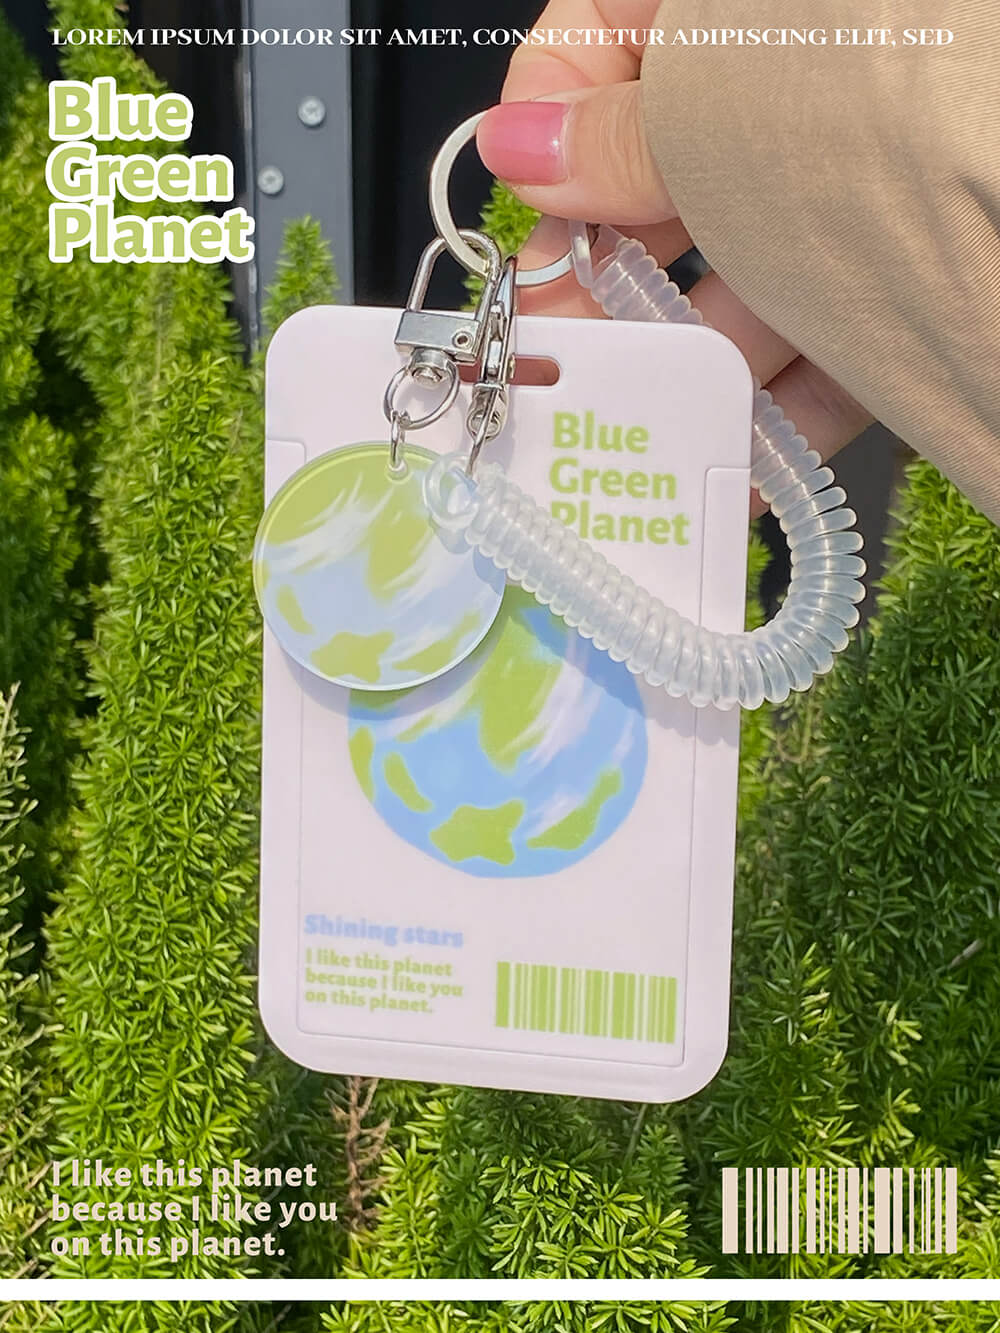 I-like-this-planet-because-I-like-you-on-this-planet-card-holder-keychain